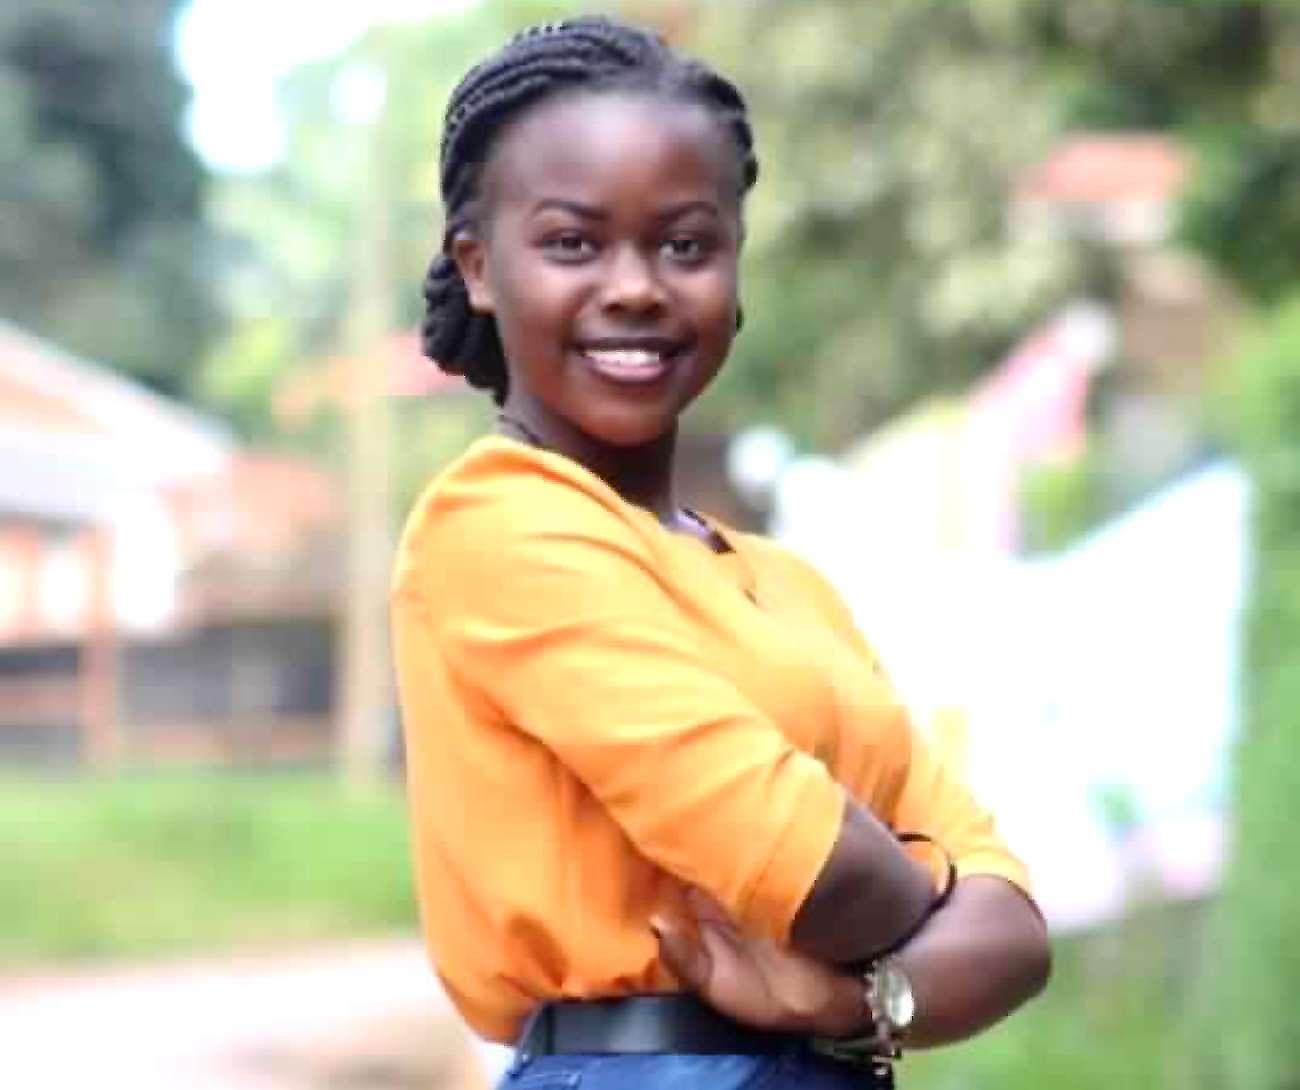 Ms. Christine Kabazira attained a First Class Honours Degree in Journalism and Communication. She will be graduating in May 2021